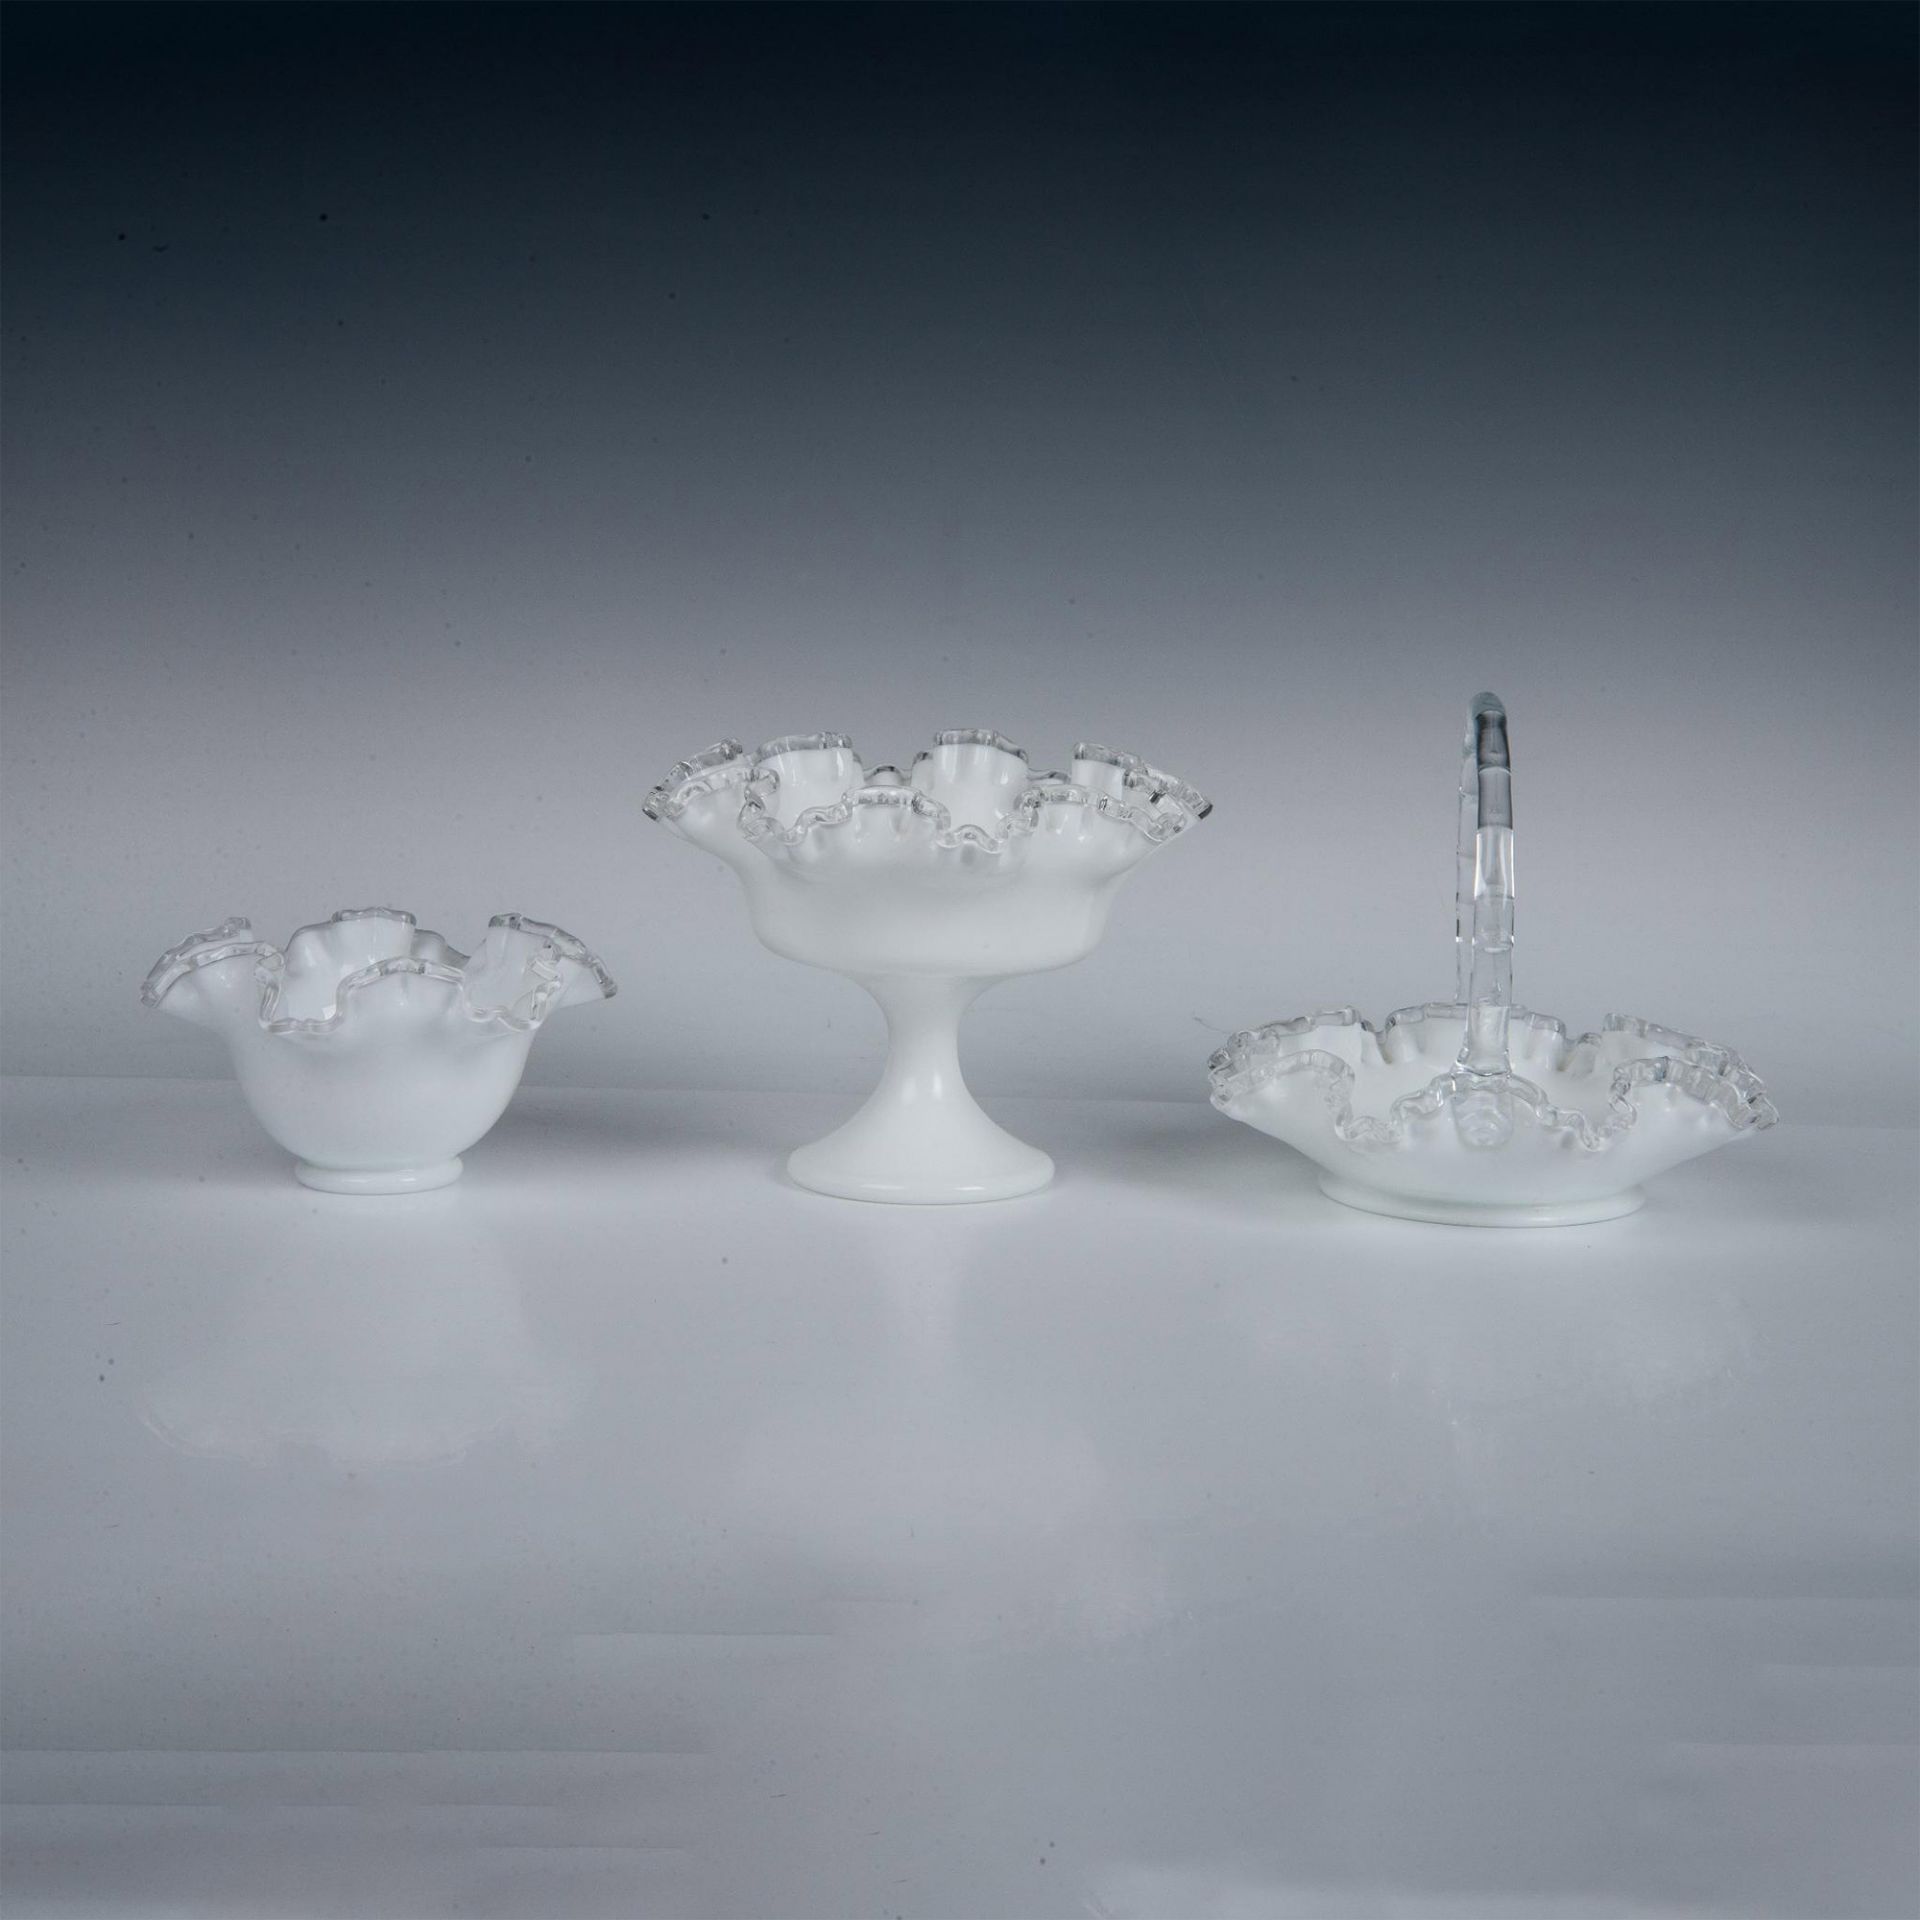 3pc Fenton Glass Tableware, Silver Crest - Image 2 of 4